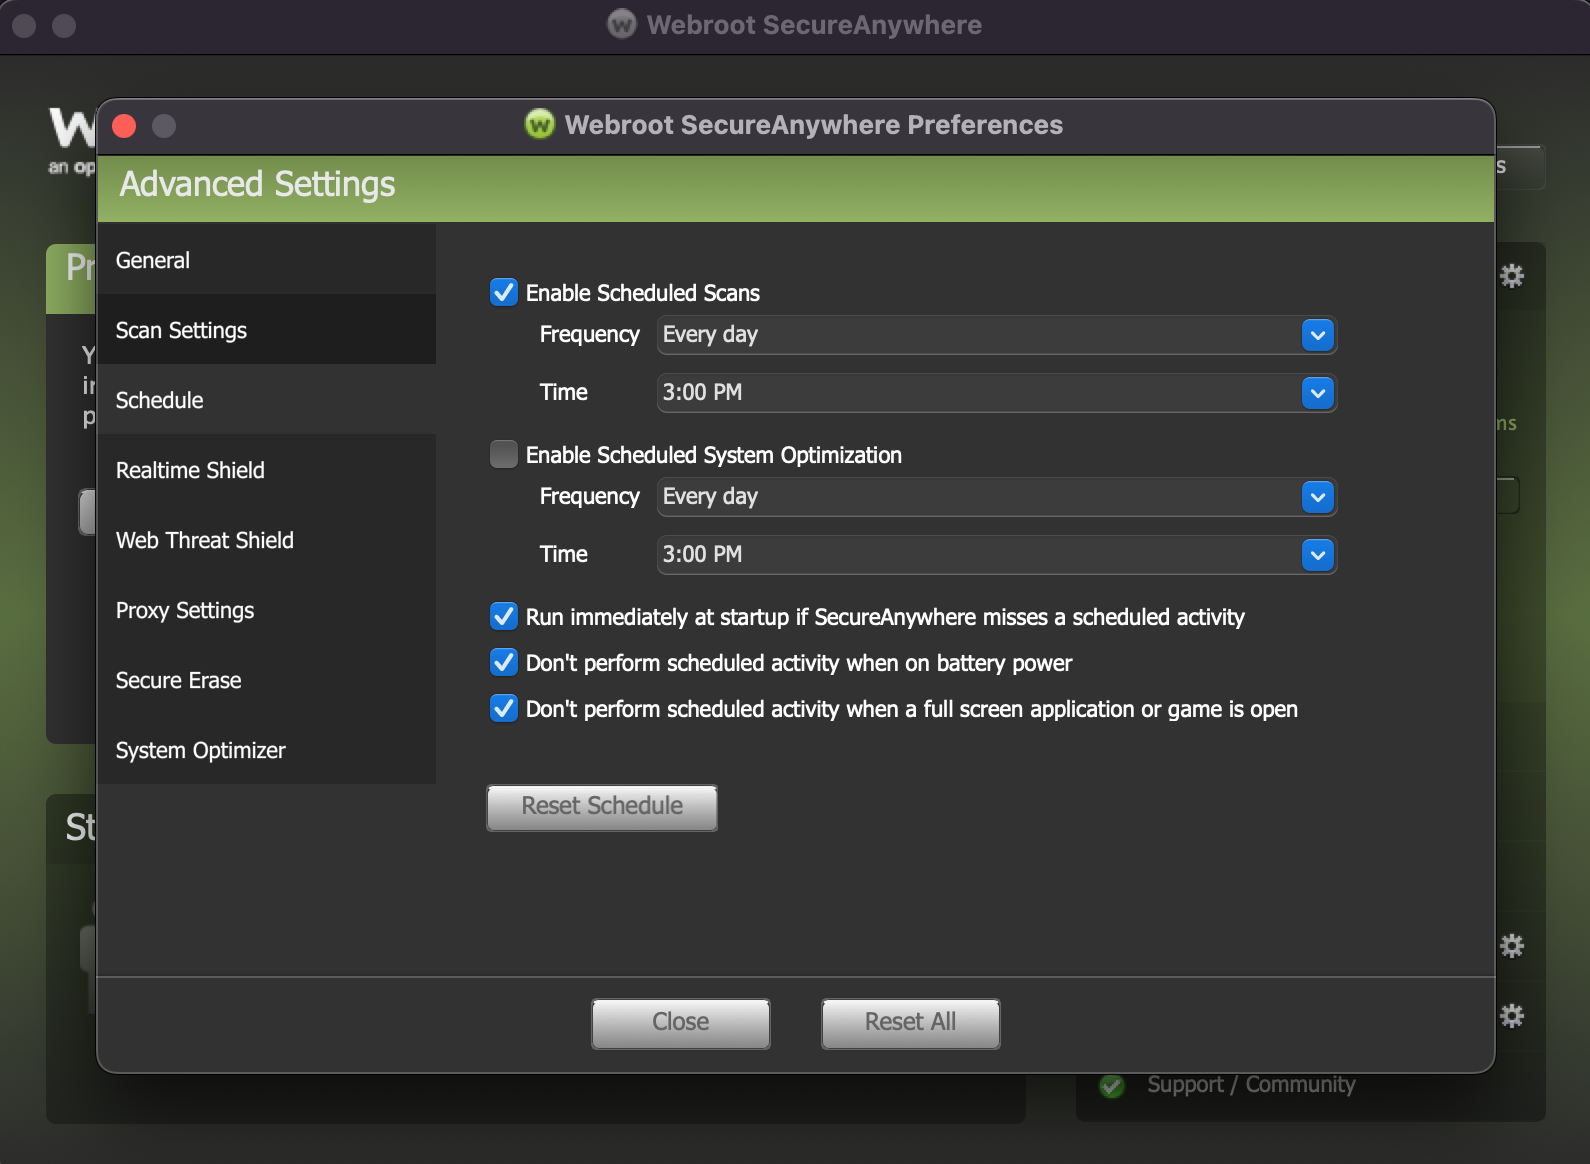 A screenshot of Webroot antivirus' Advanced Settings menu with the Schedule tab selected. This allows you to schedule scans and system optimizations for certain frequencies and times of day.